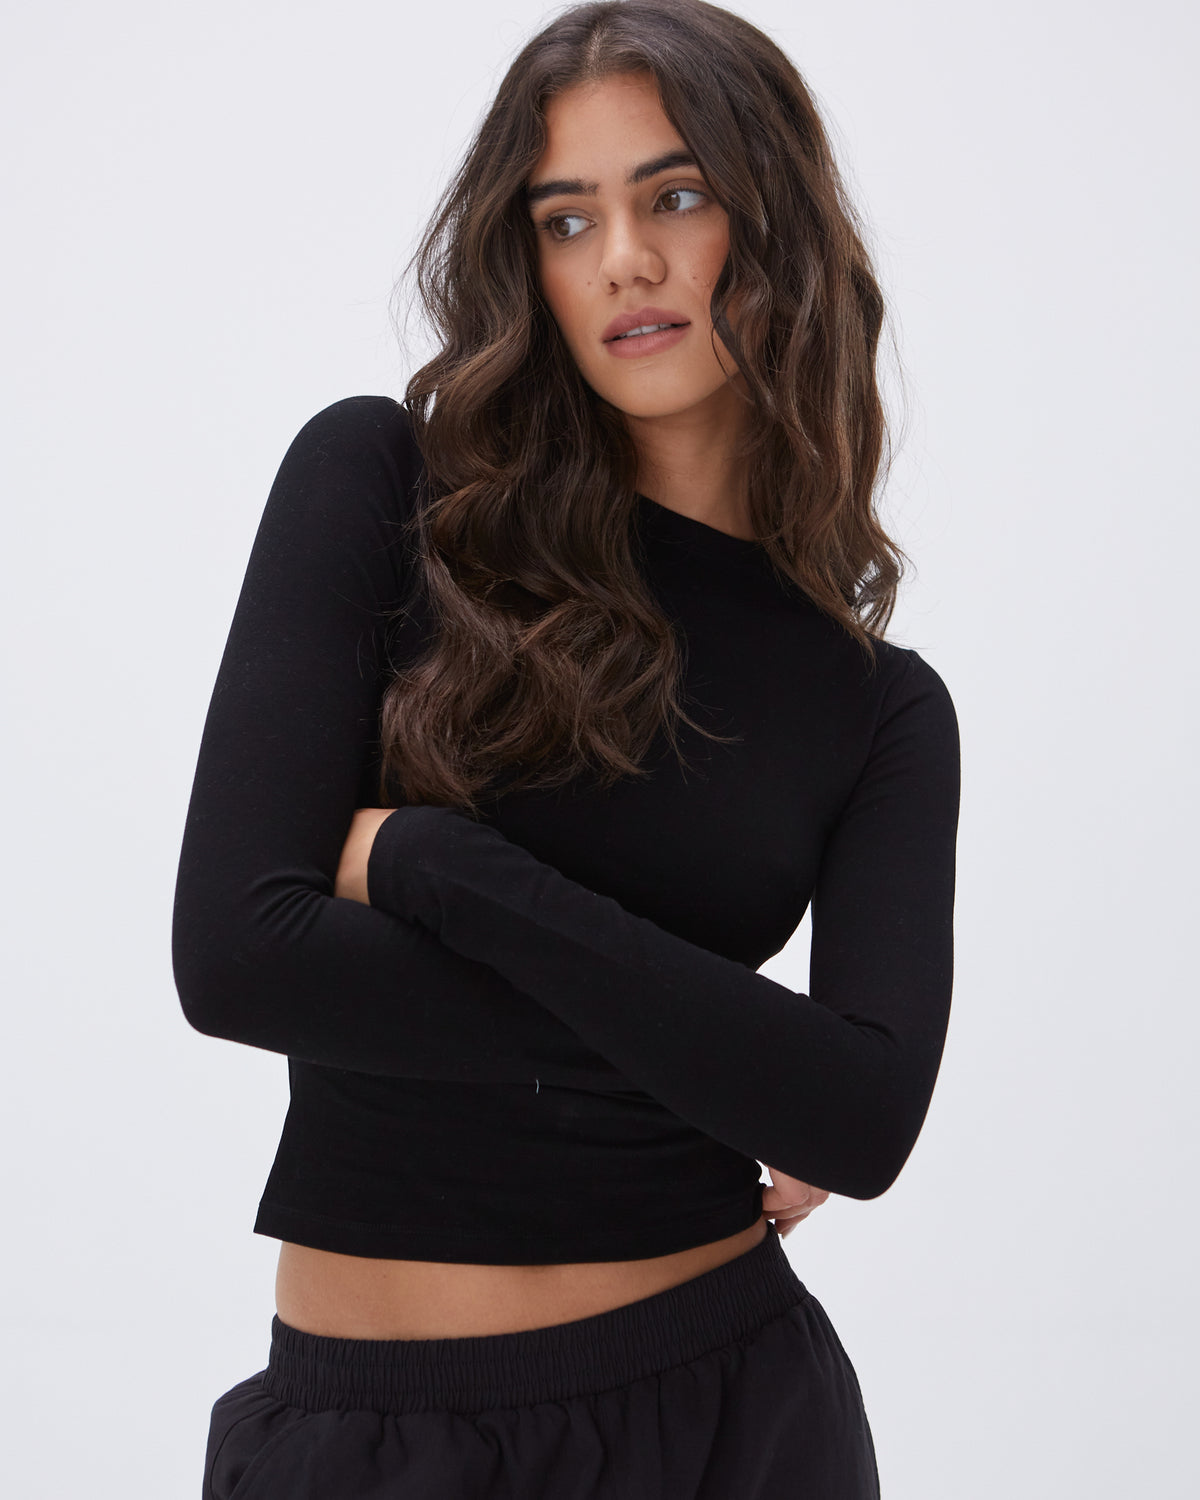 Ella Lace Layer Top - Black - Tops - Long Sleeve - Women's Clothing - Storm